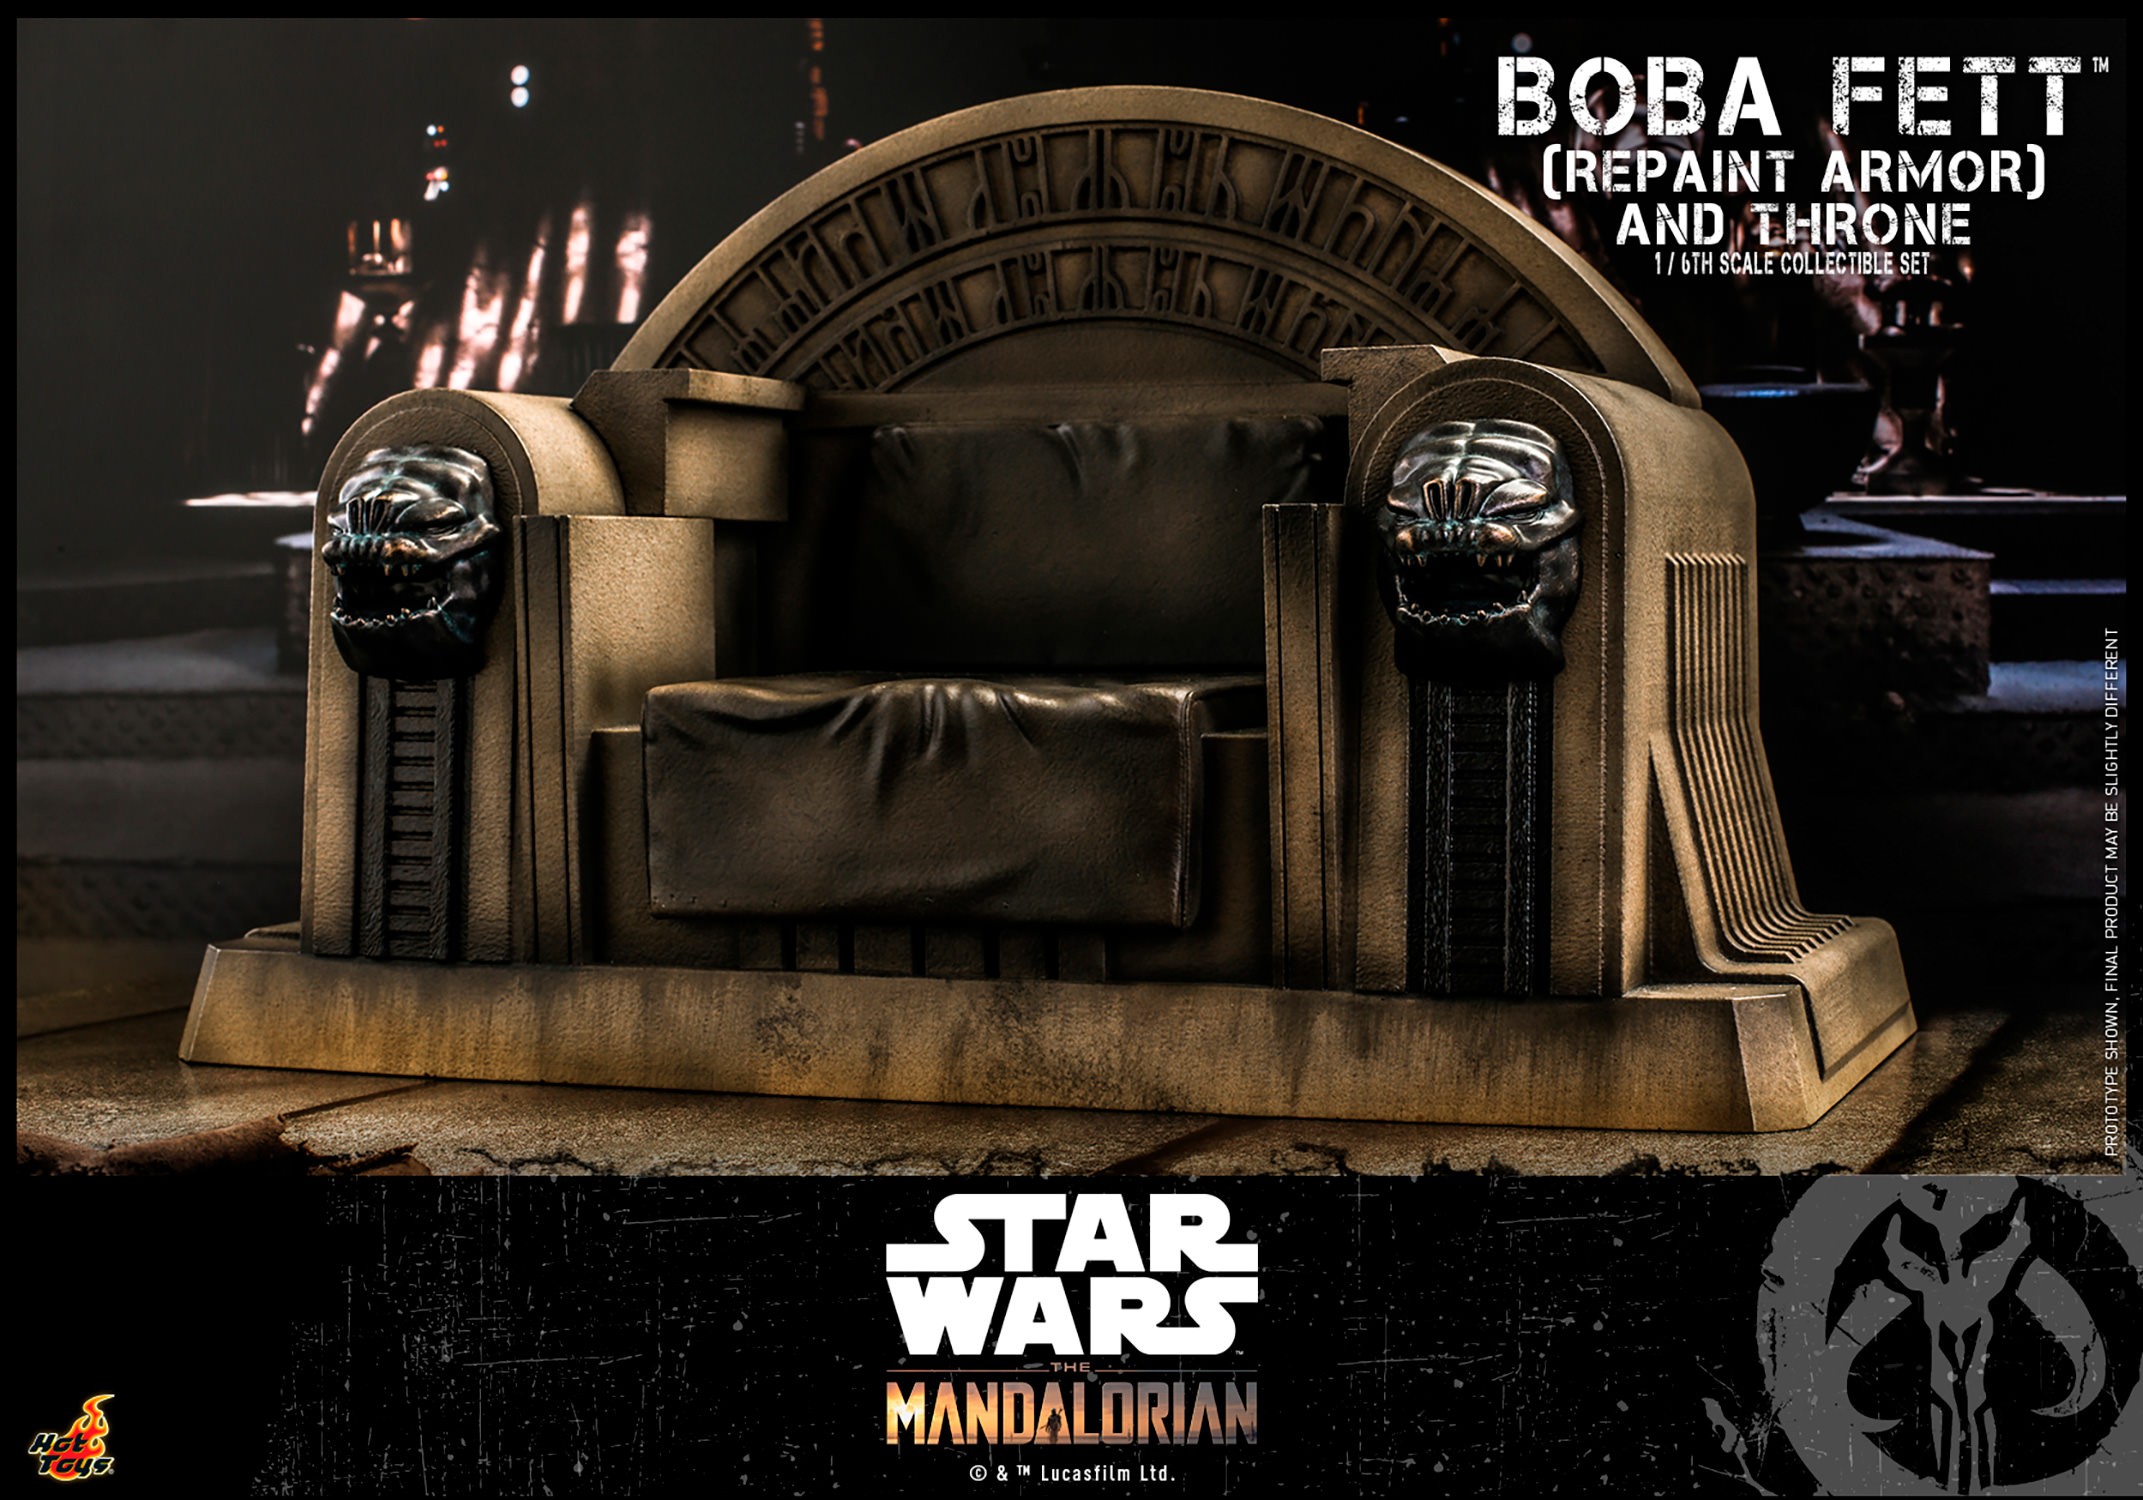 Boba Fett Repaint Armour and Throne Set™ - Sixth Scale Figure Set by Hot Toys